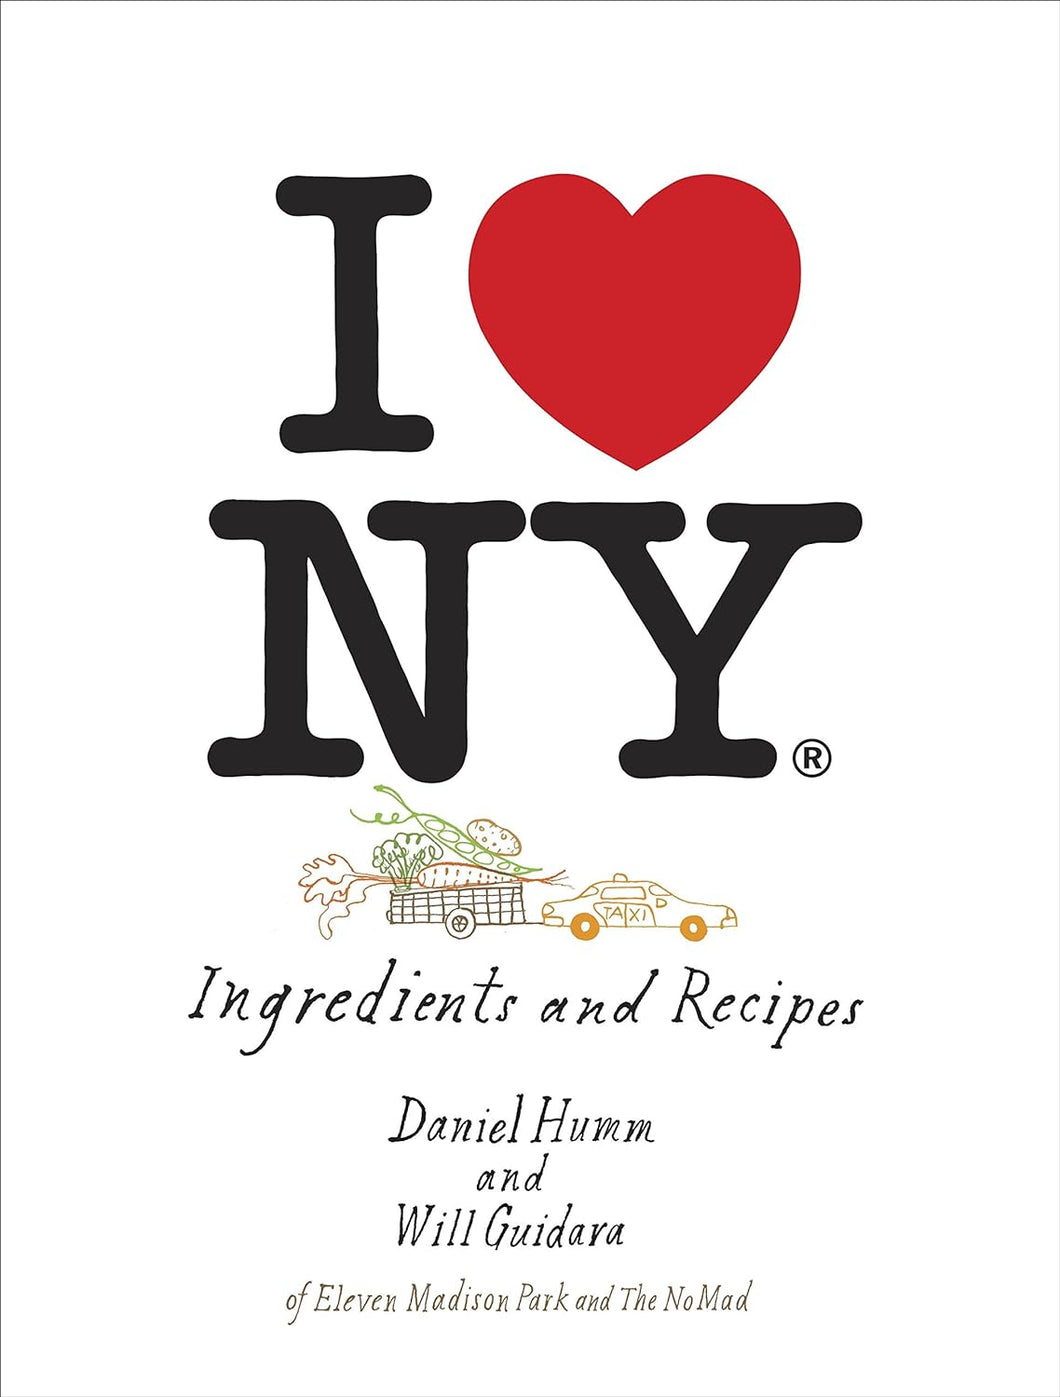 I Love New York: Ingredients and Recipes by Daniel Humm and Will Guidara